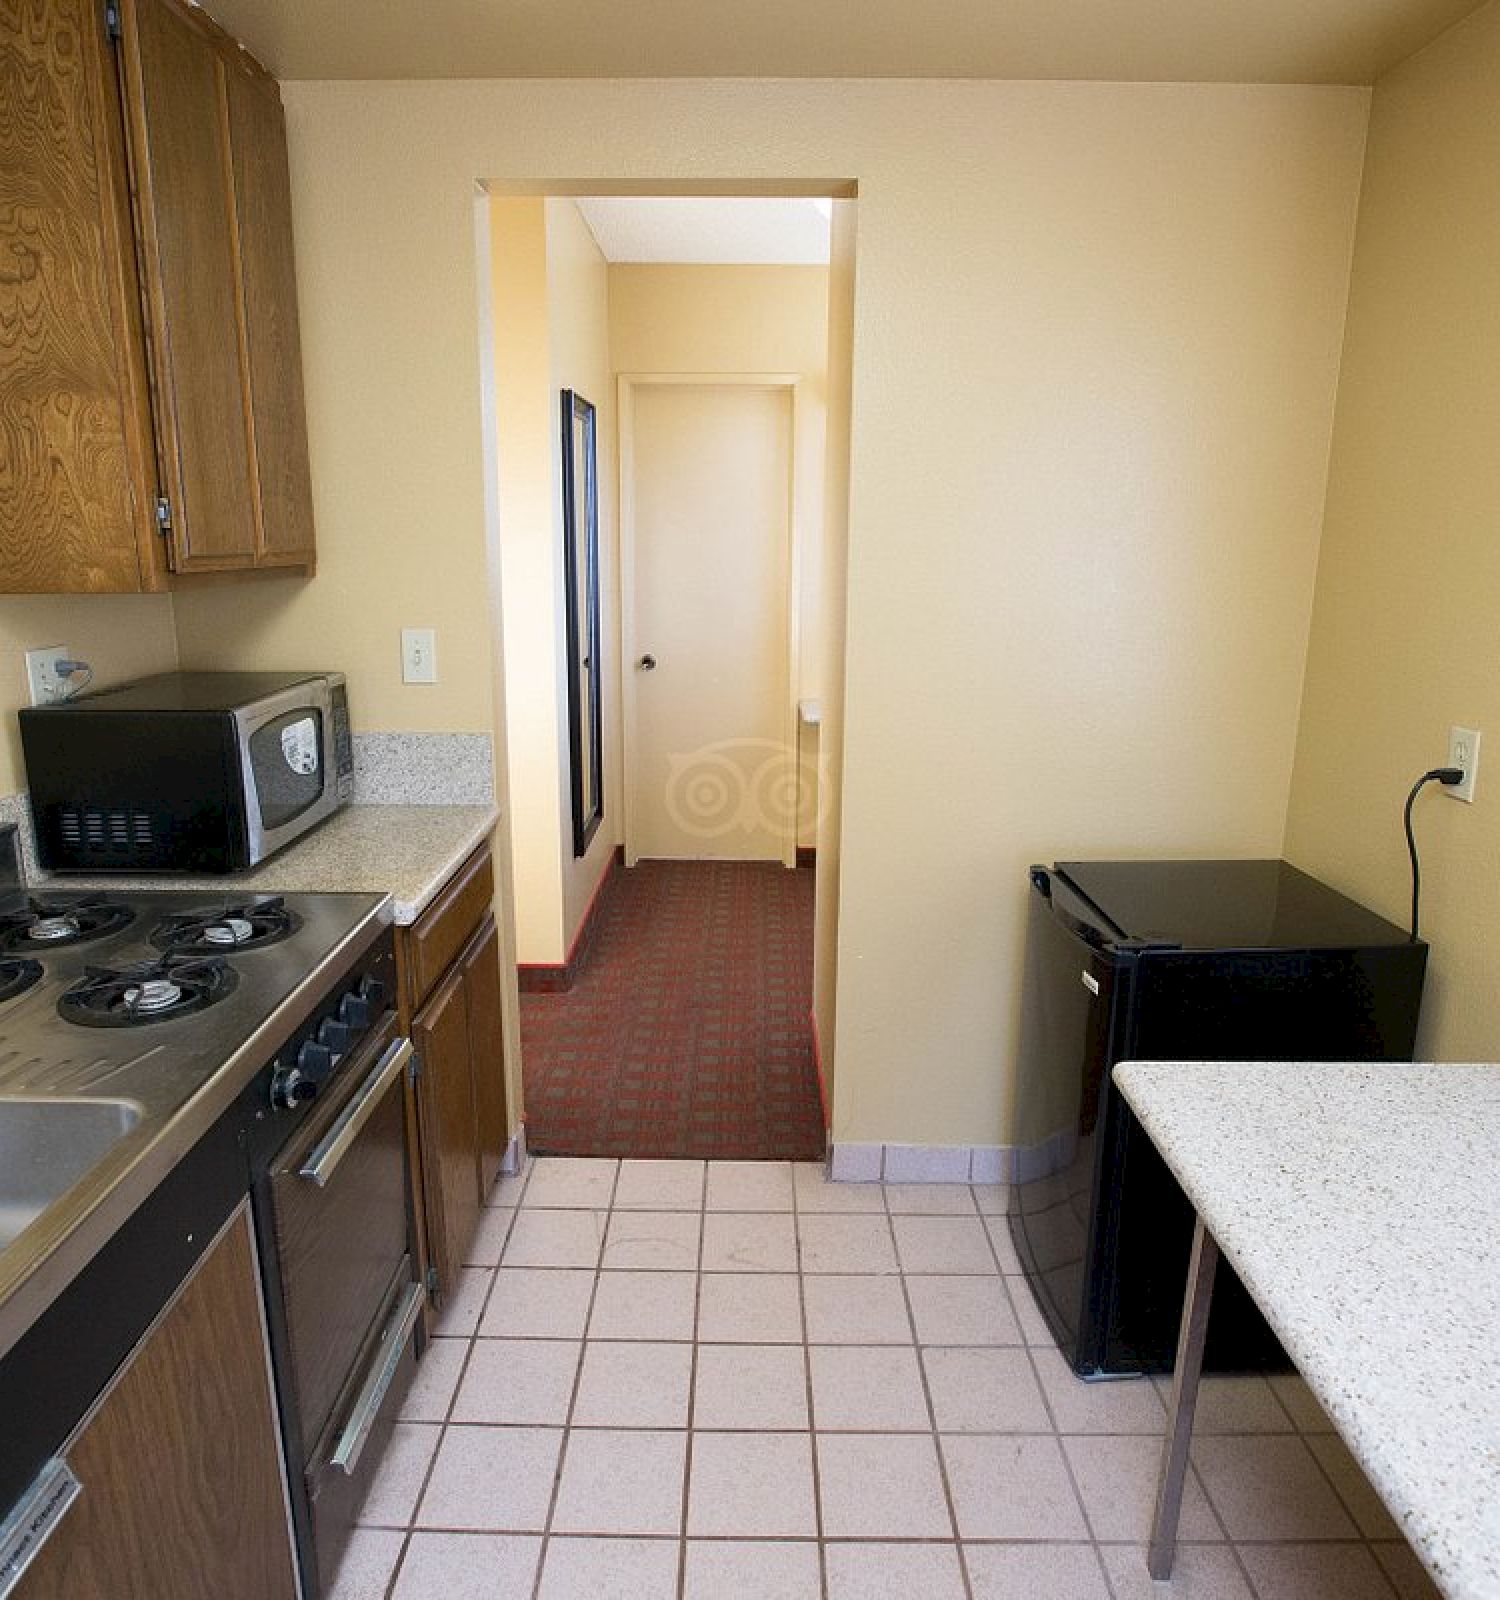 A small kitchen with a sink, stove, microwave, dishwasher, refrigerator, table, and cabinets. The kitchen opens into a hallway with a carpet.